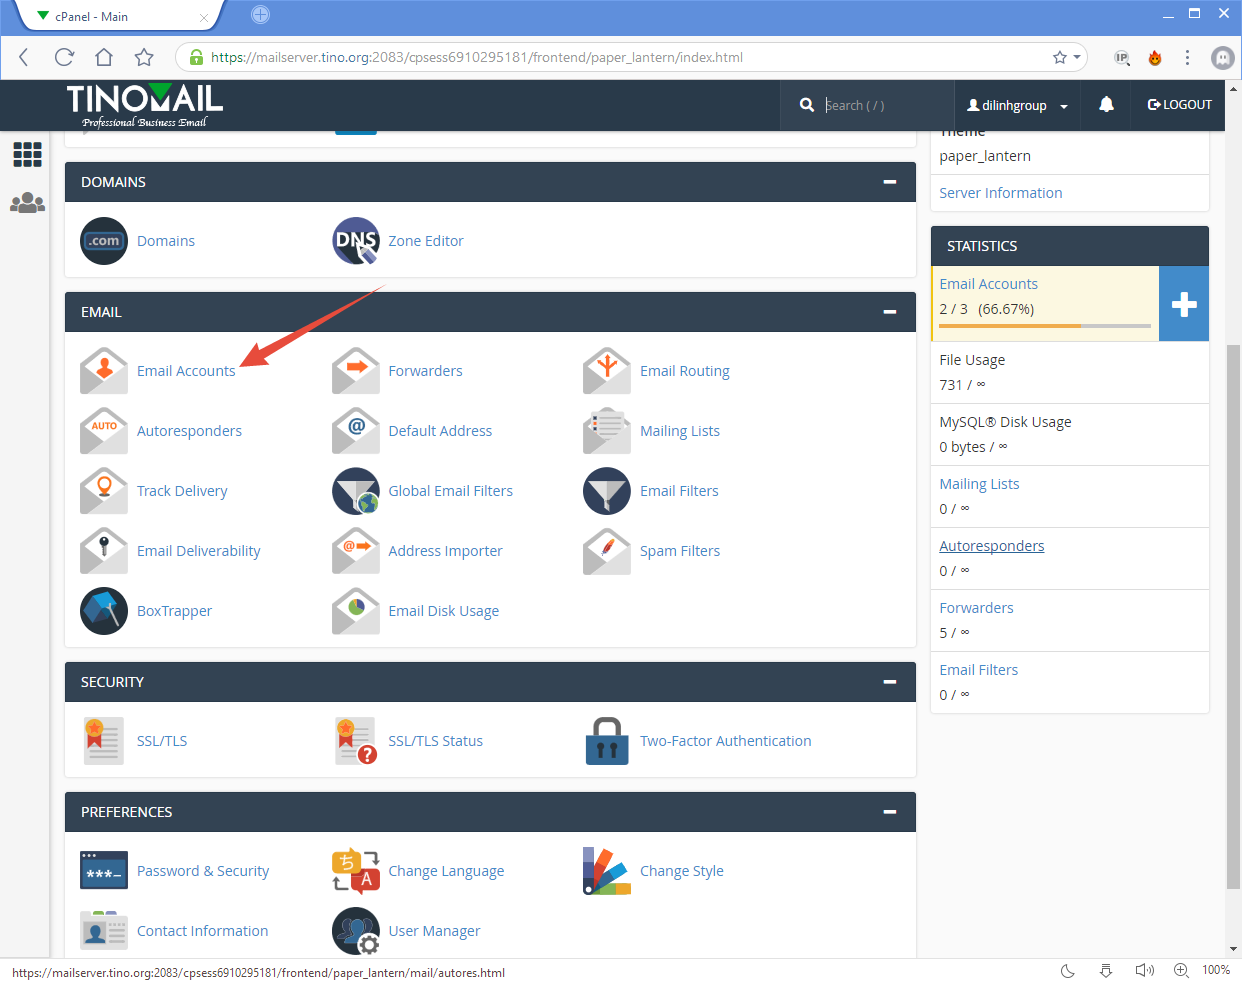 [cPanel] - Email Accounts 1